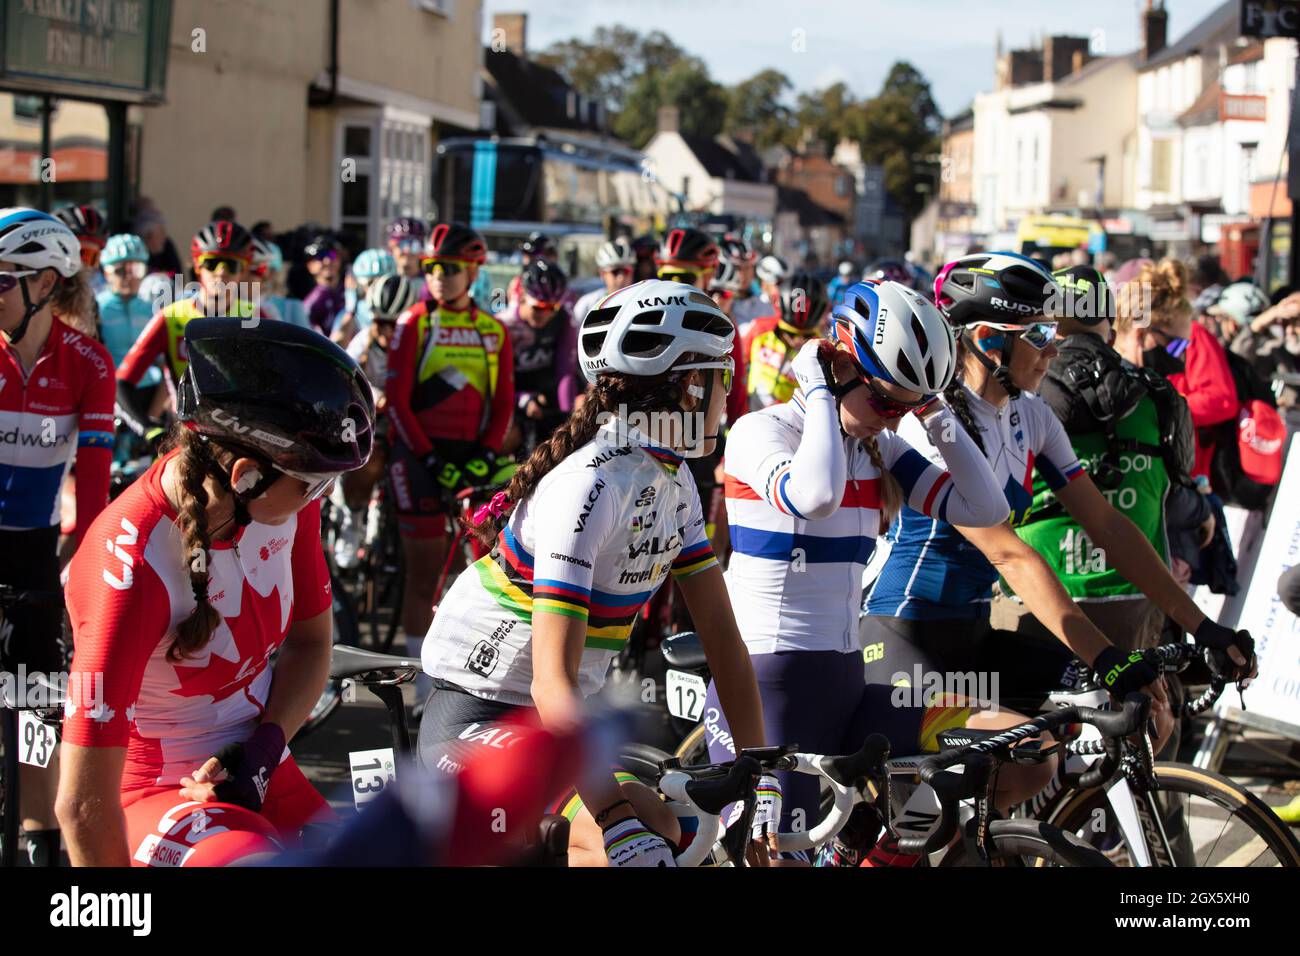 Bicester, UK - October 2021: Competitors line up at the start of the Womens Tour a cycle race in the UK Stock Photo